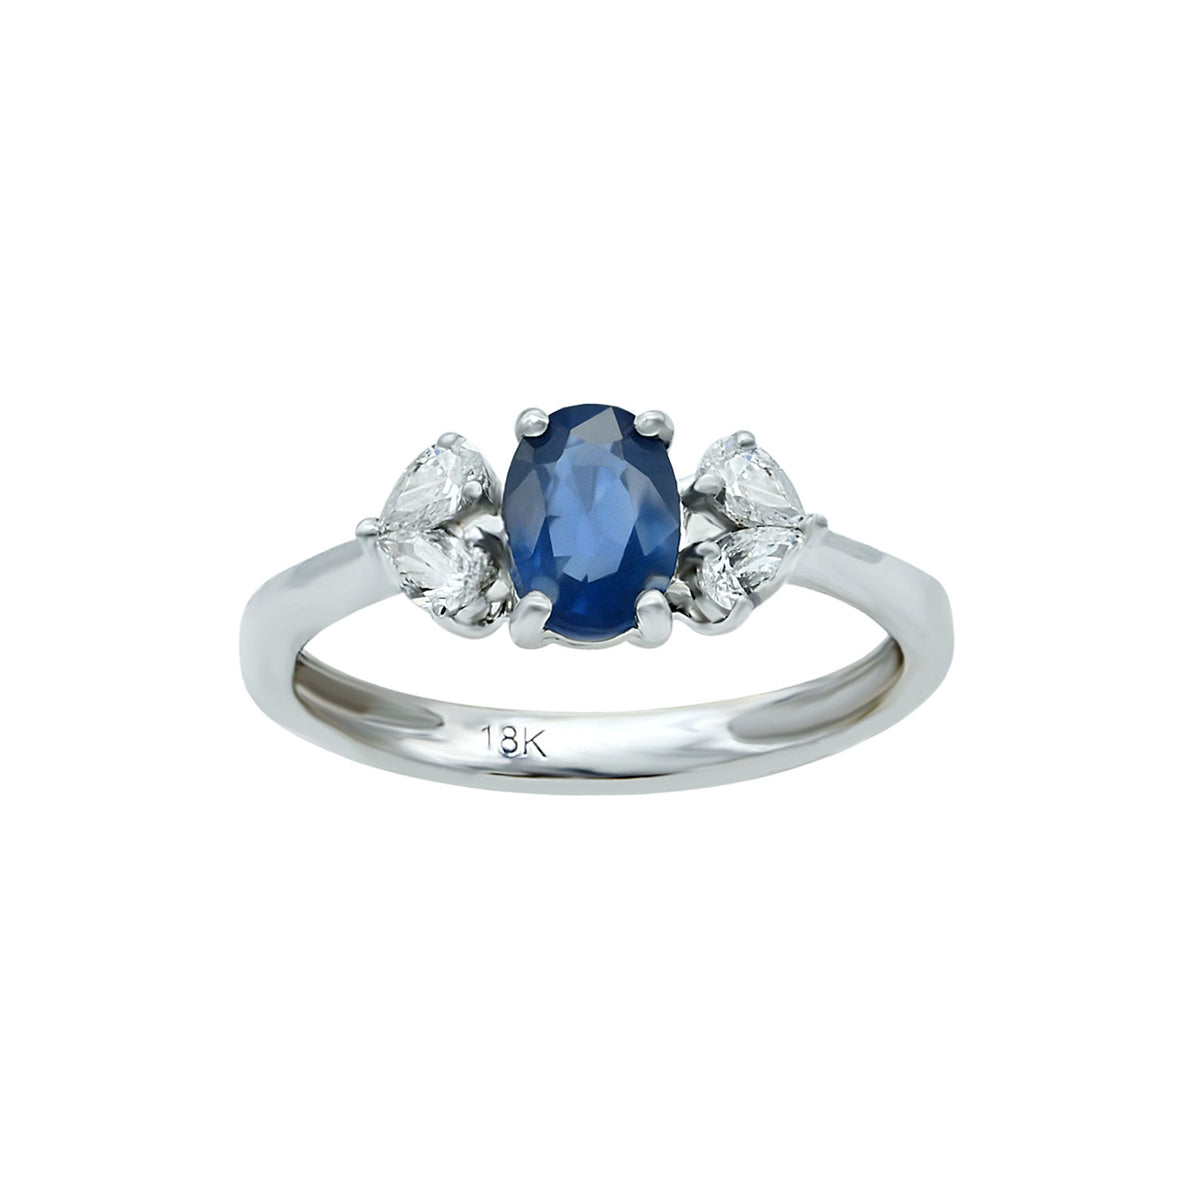 Sapphire ring. Diamond and sapphire ring. Oval sapphire ring. Promise ring.